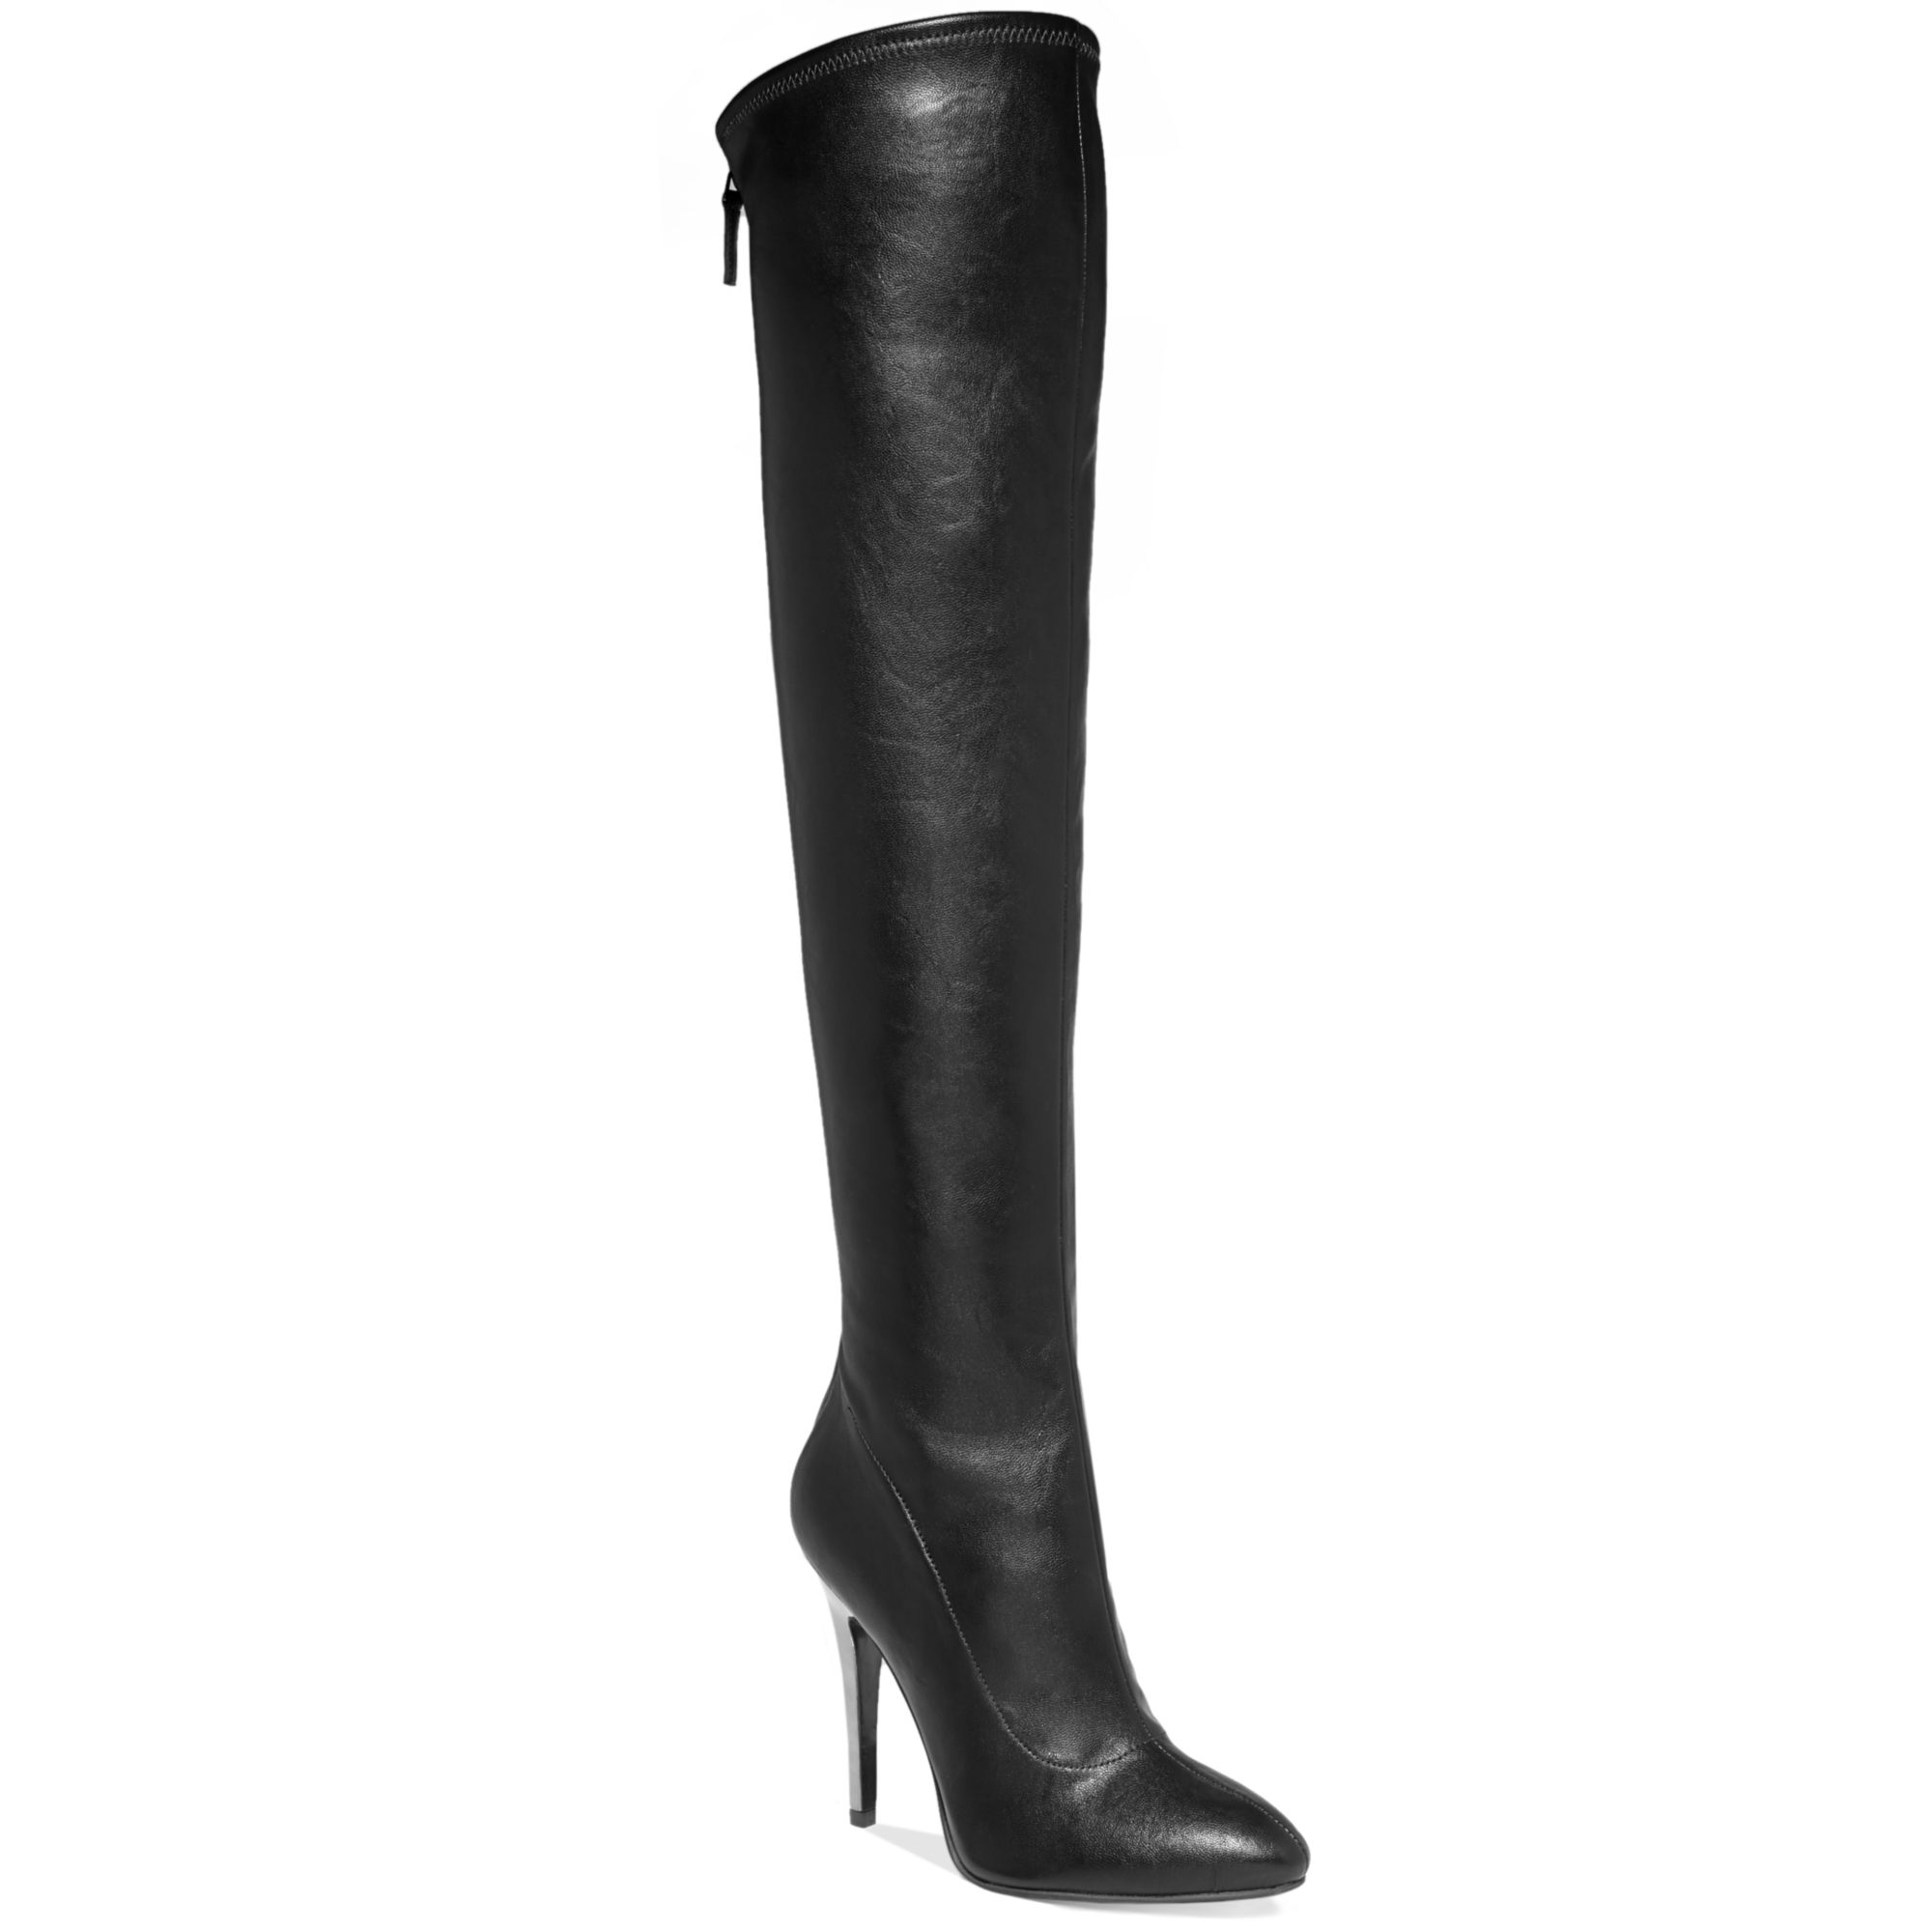 Nine West Bam Over The Knee Dress Boots in Black | Lyst